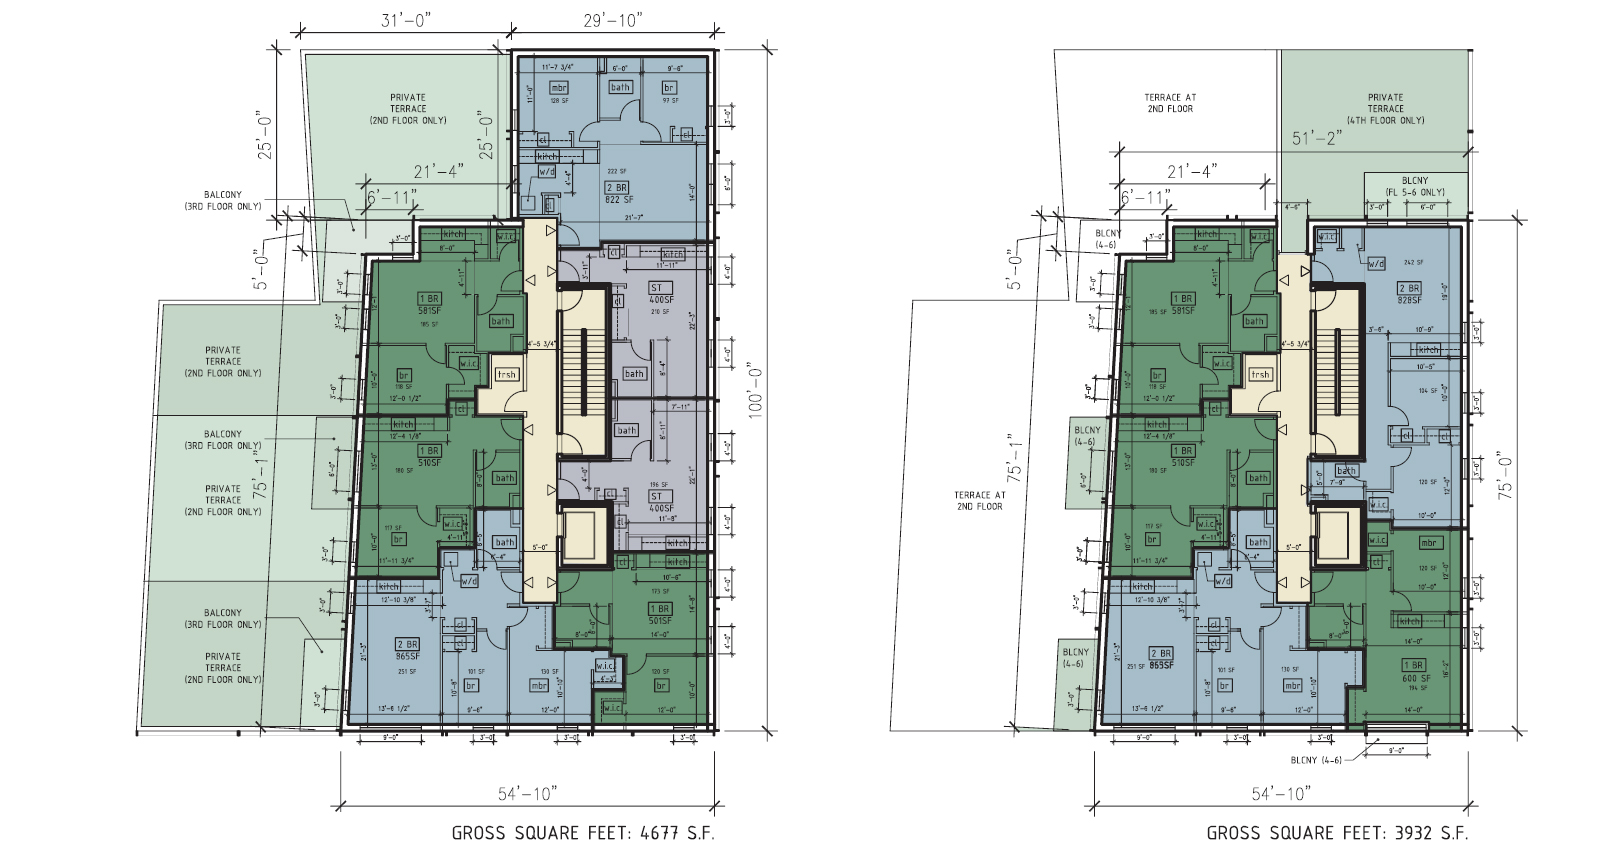 25-11 38th Avenue floor plan – typical floor (left) and top floor (right). Drawing by RSVP Studio, dated November 2013, publicly available via the Remedial Investigation Report.